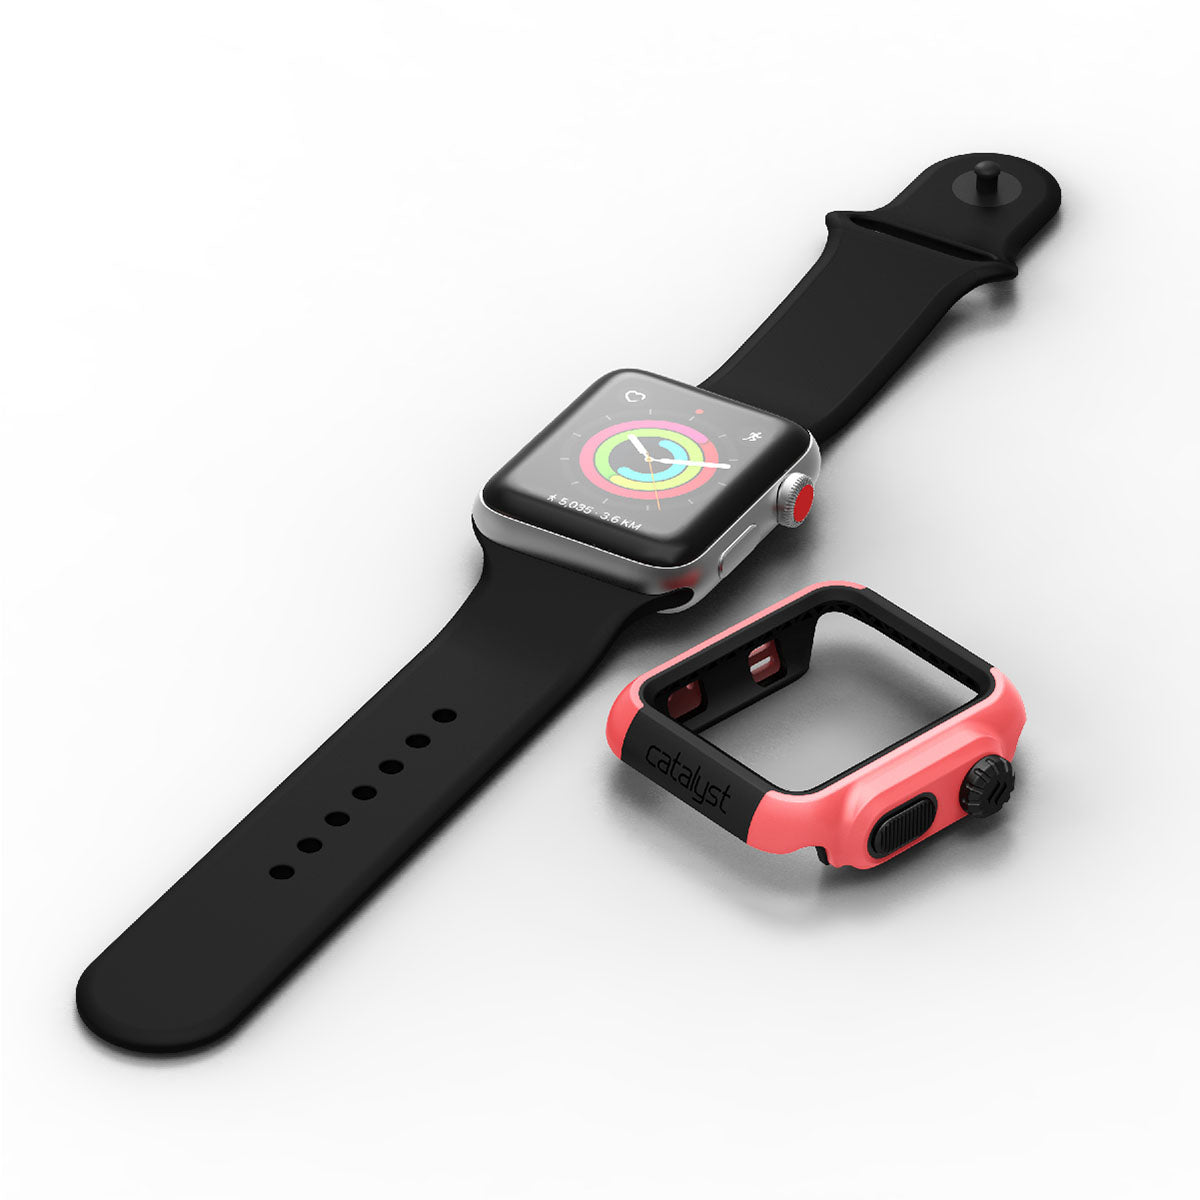 catalyst apple watch series 3 2 42mm impact protection case apple watch with black band and uninstalled impact protection case coral